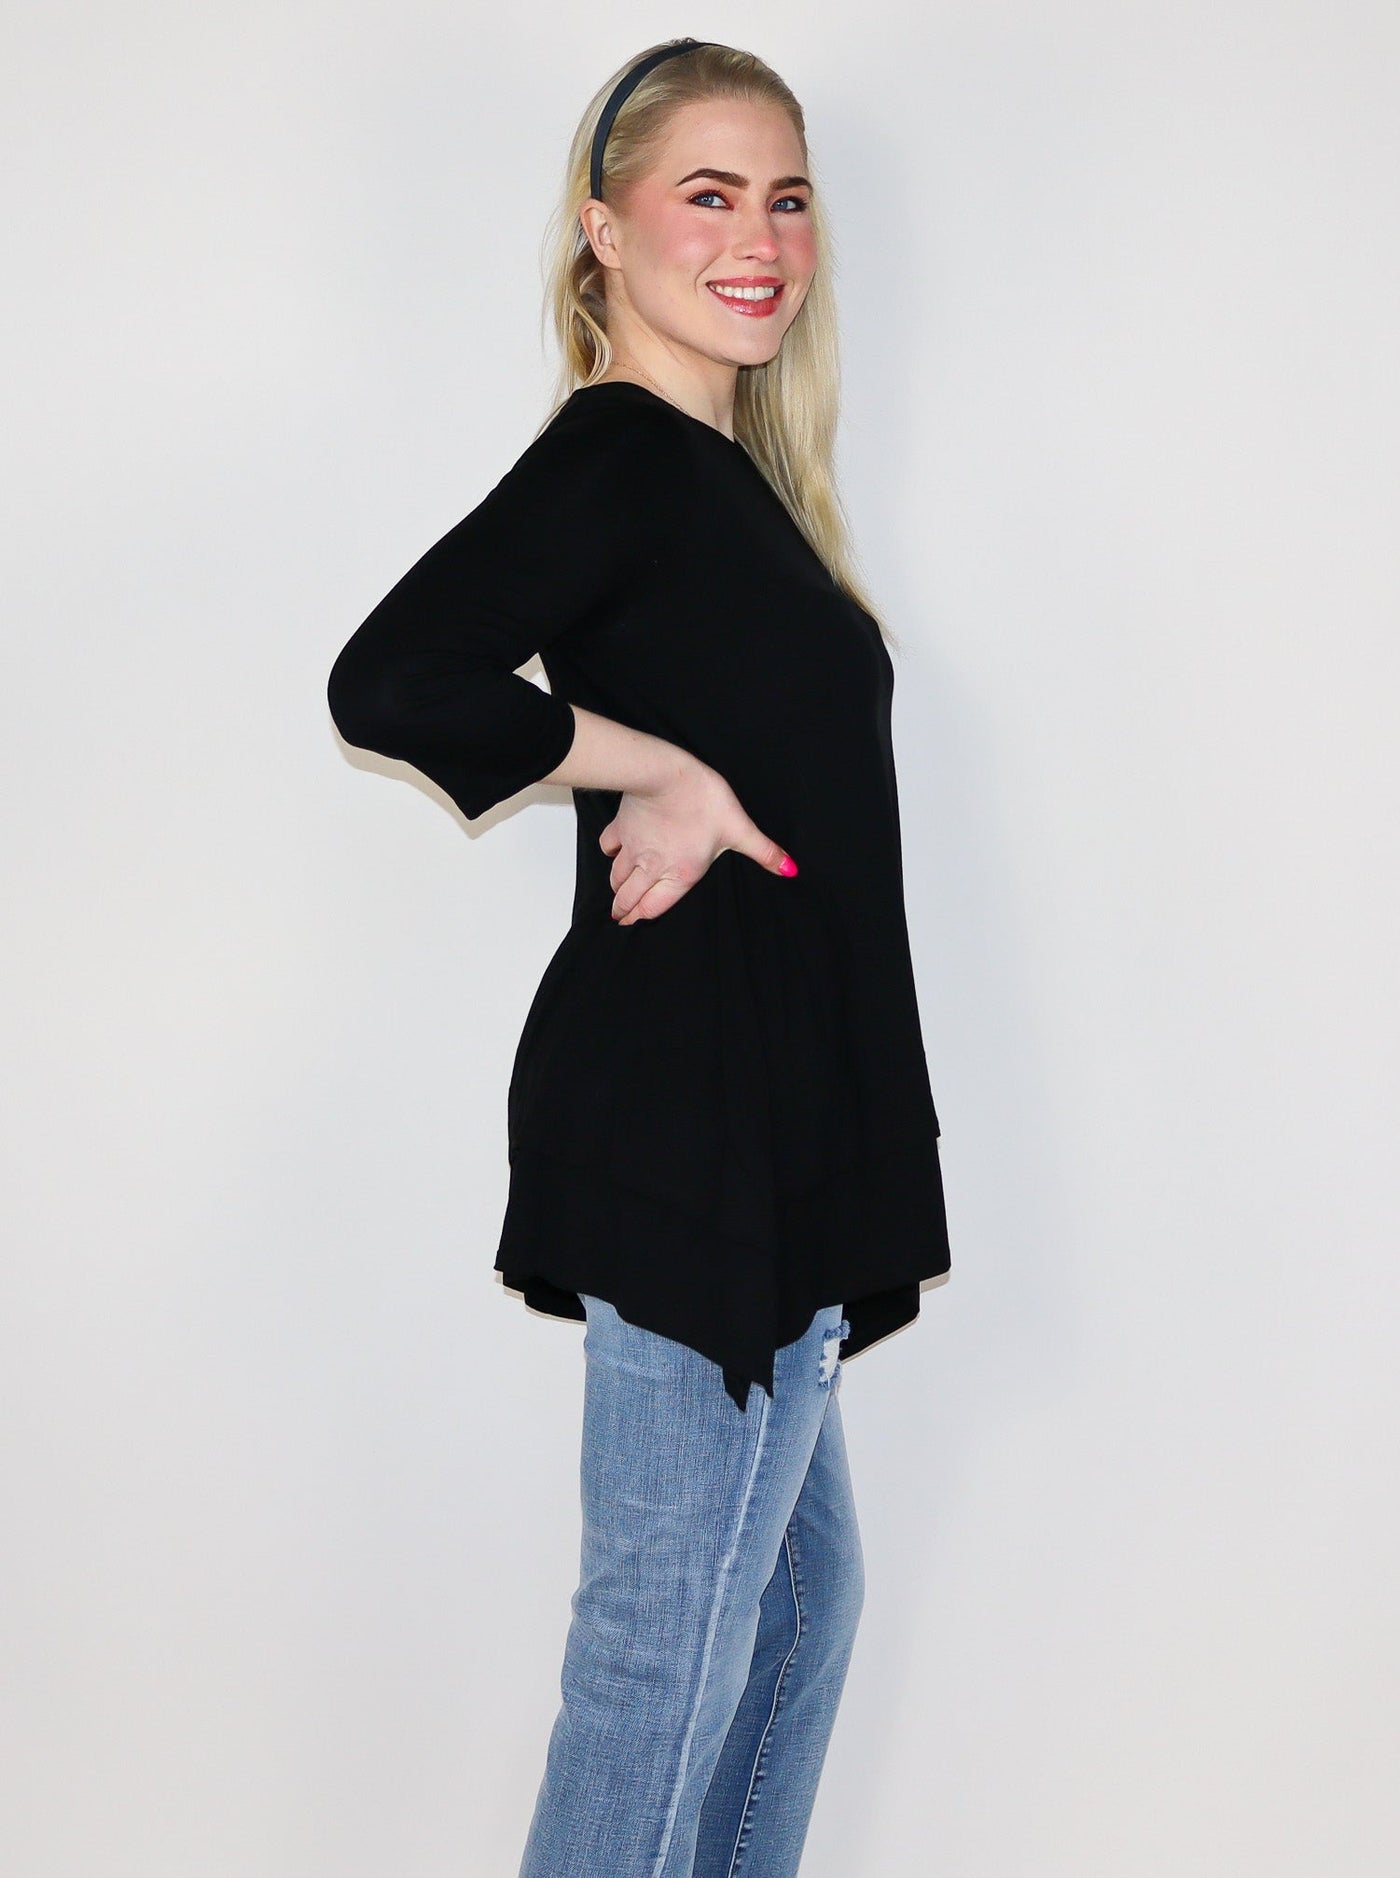 The model is wearing a flowey 3/4th length sleeve black fitted longsleeve. Top is paired with jeans.